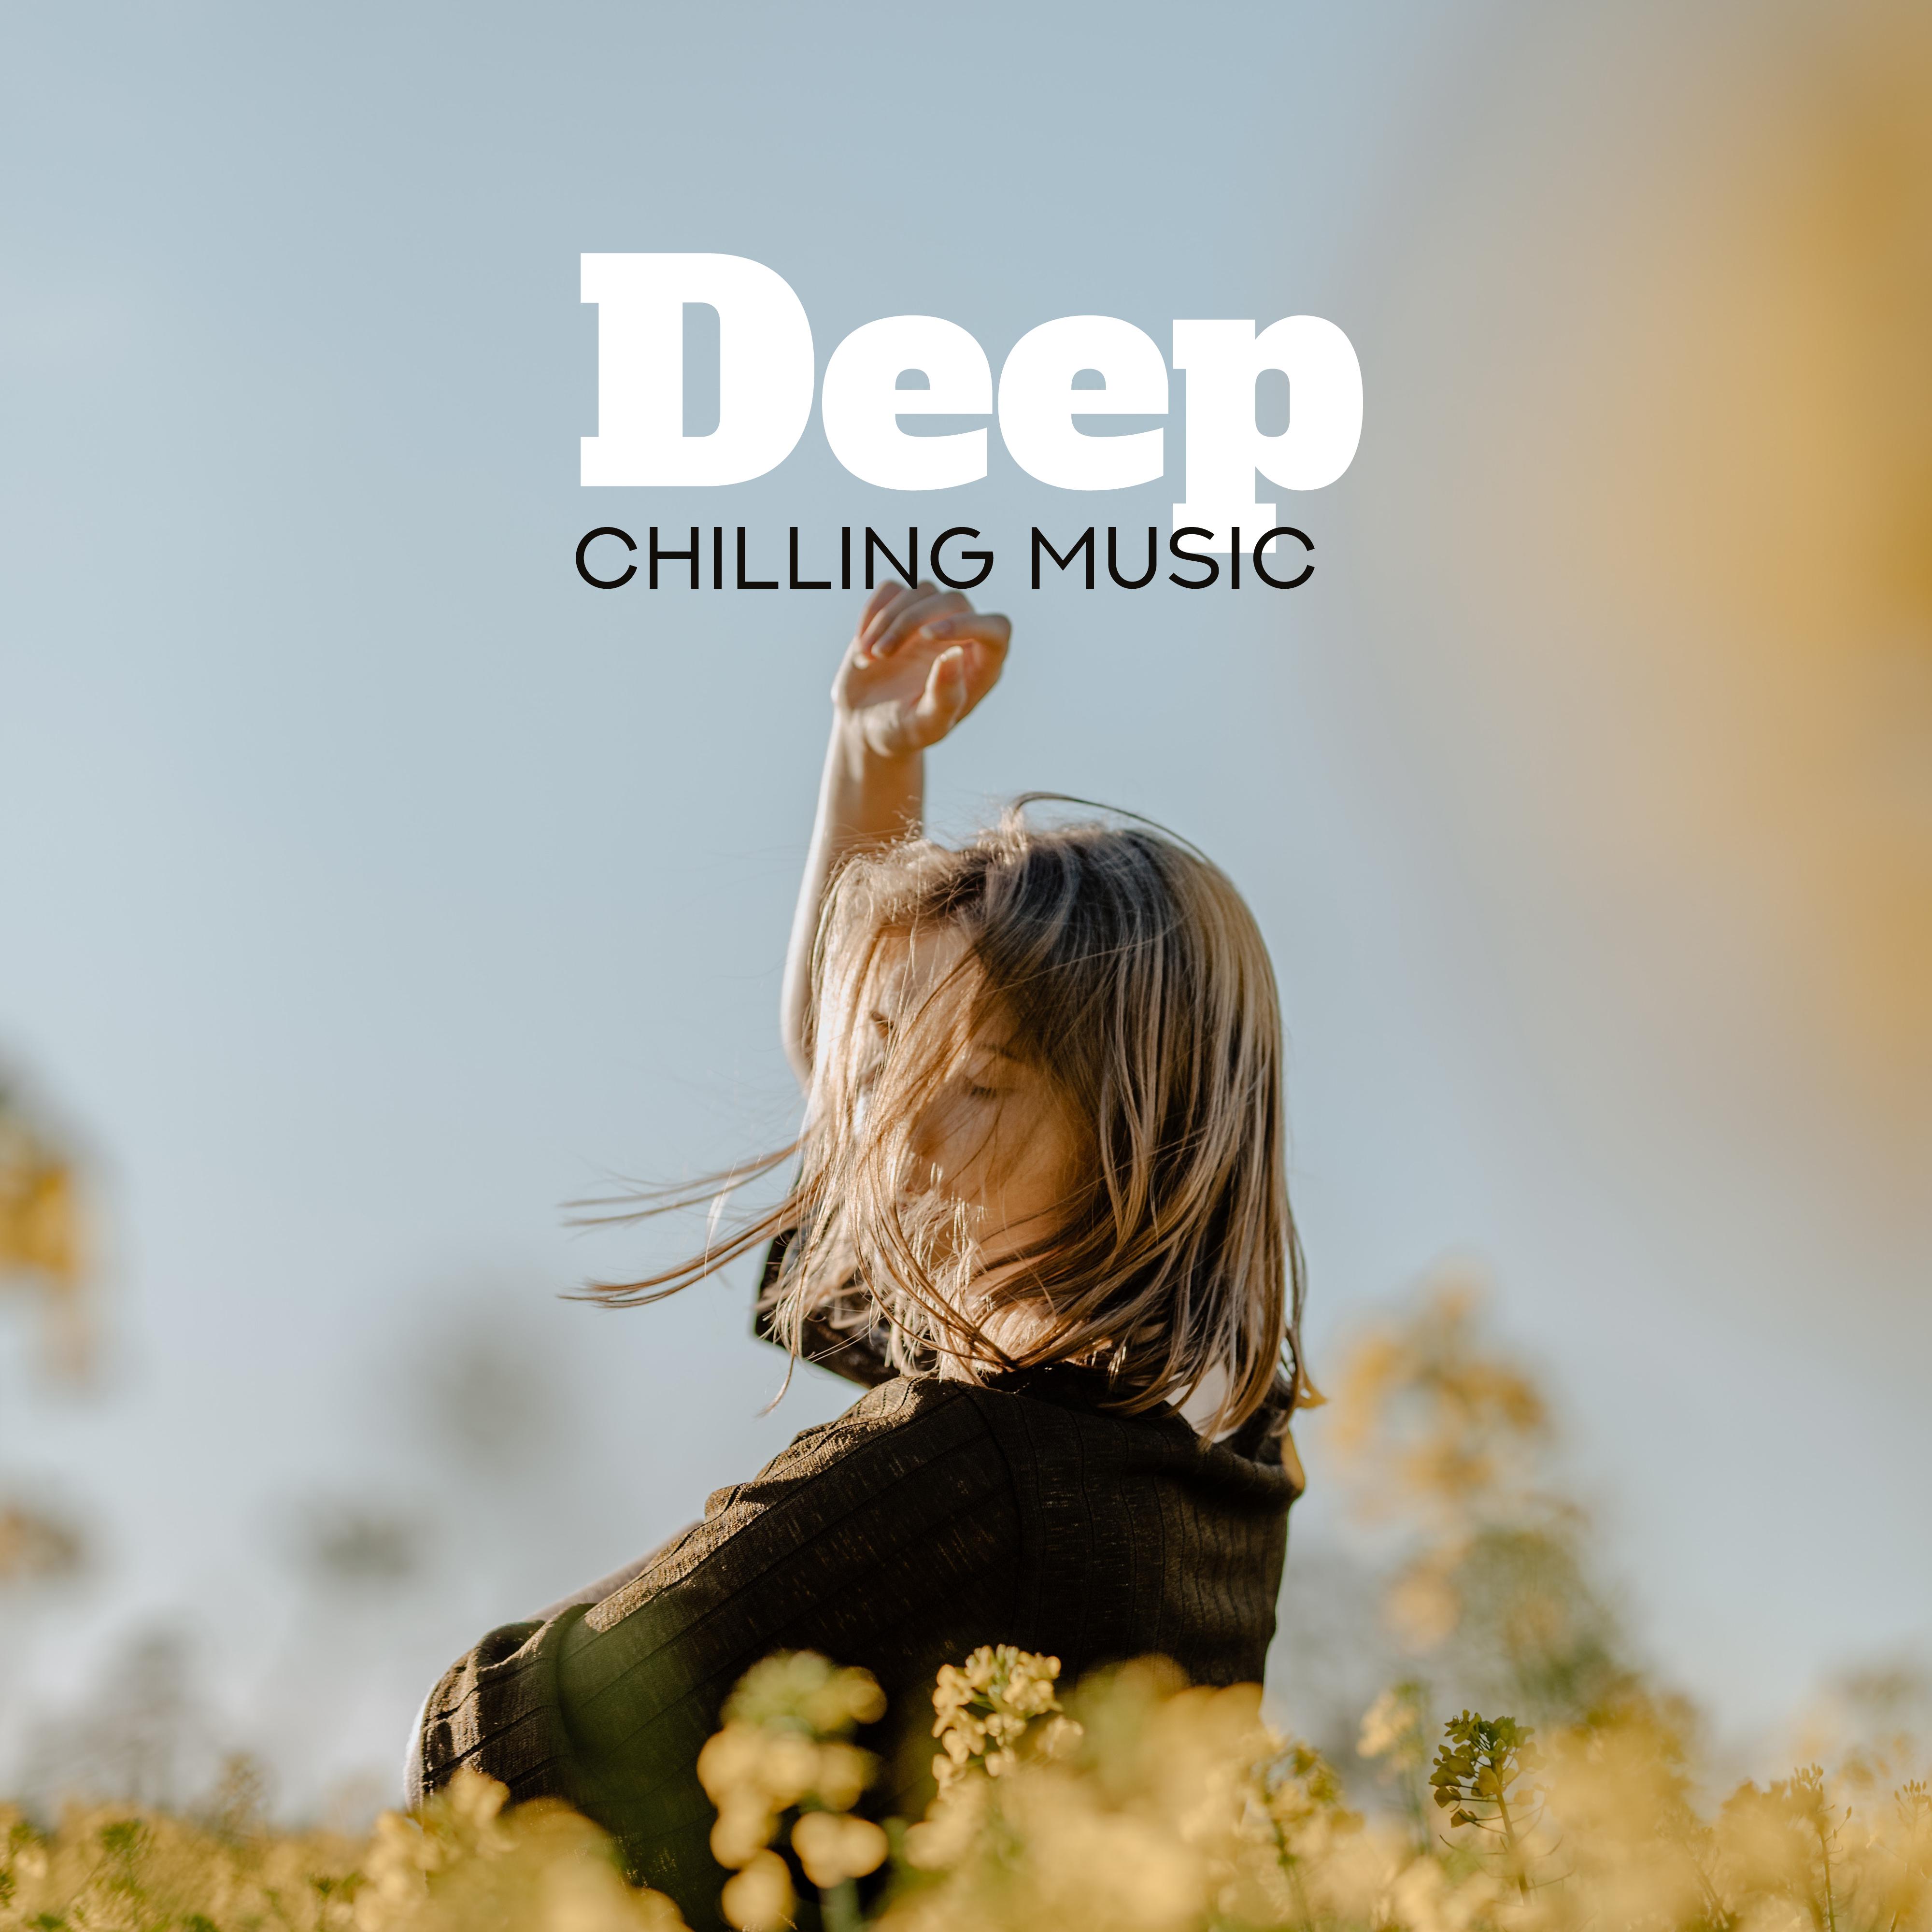 Deep Chilling Music: Chillout Compilation of 15 Songs for Relaxation, Rest, Laziness and Sweet Doing Nothing